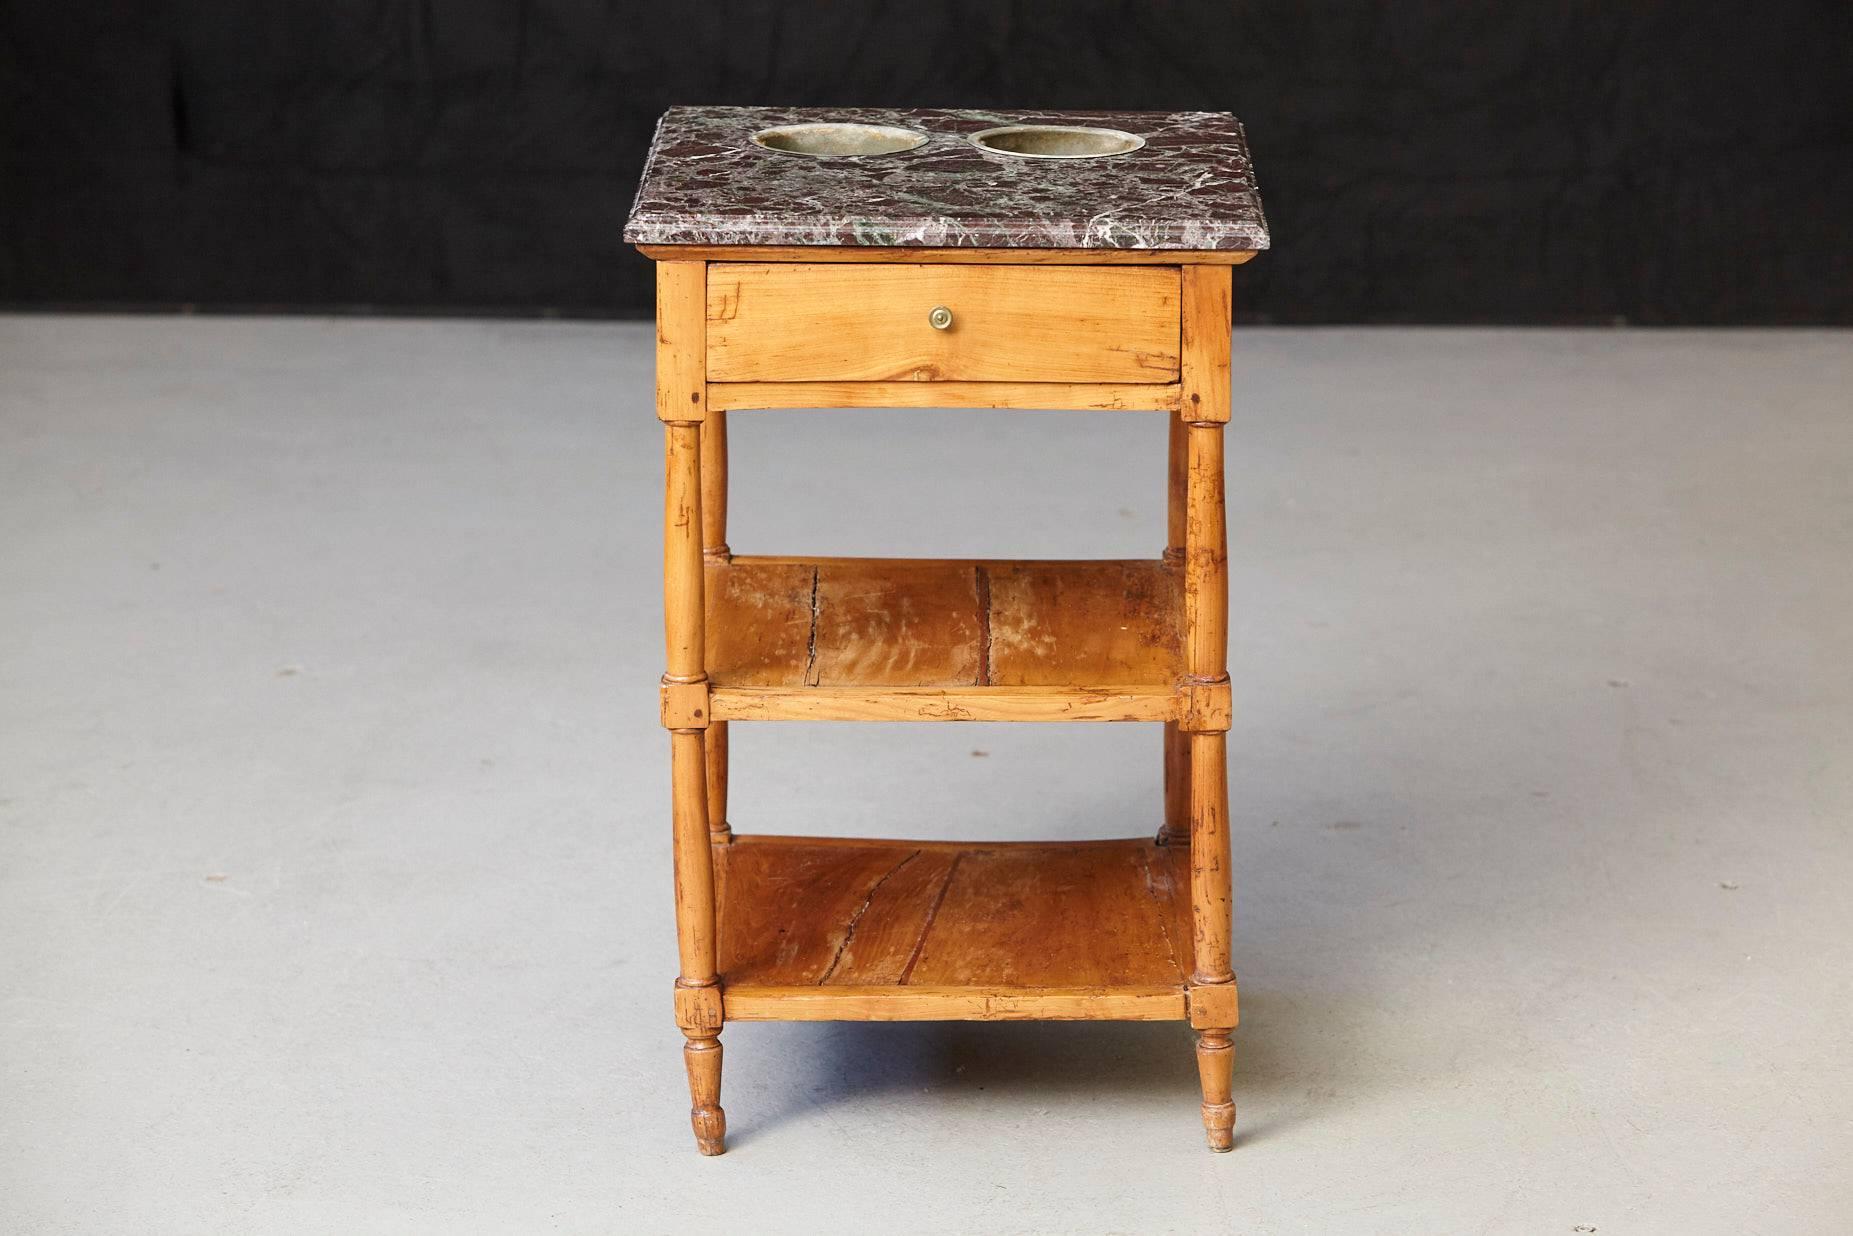 19th century French Provincial fruitwood work table having a square variegated grey and beveled marble top overhanging above a frieze with a single drawer, raised on turned columnar legs joined by two shelf stretchers.
The marble top has two zinc